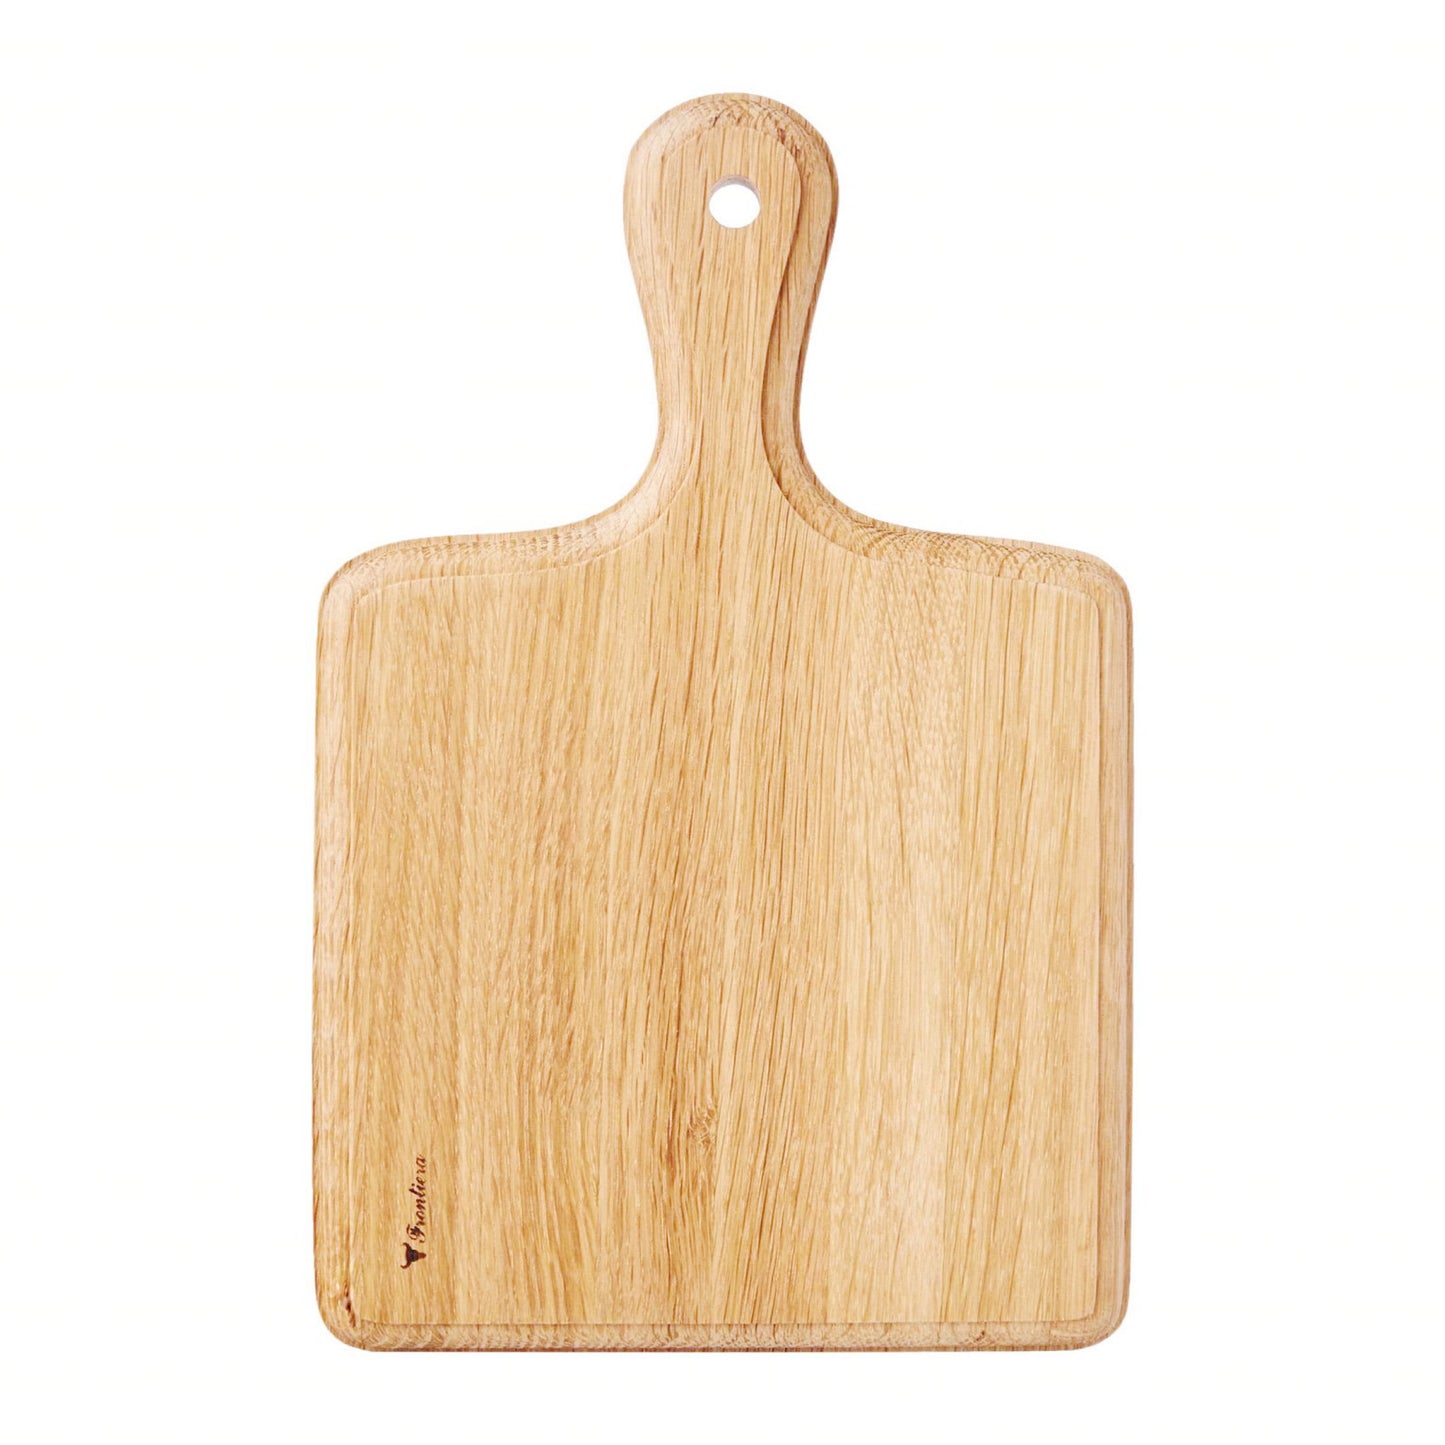 Frontiera Natural Wood Cheese board (Short) 246mm